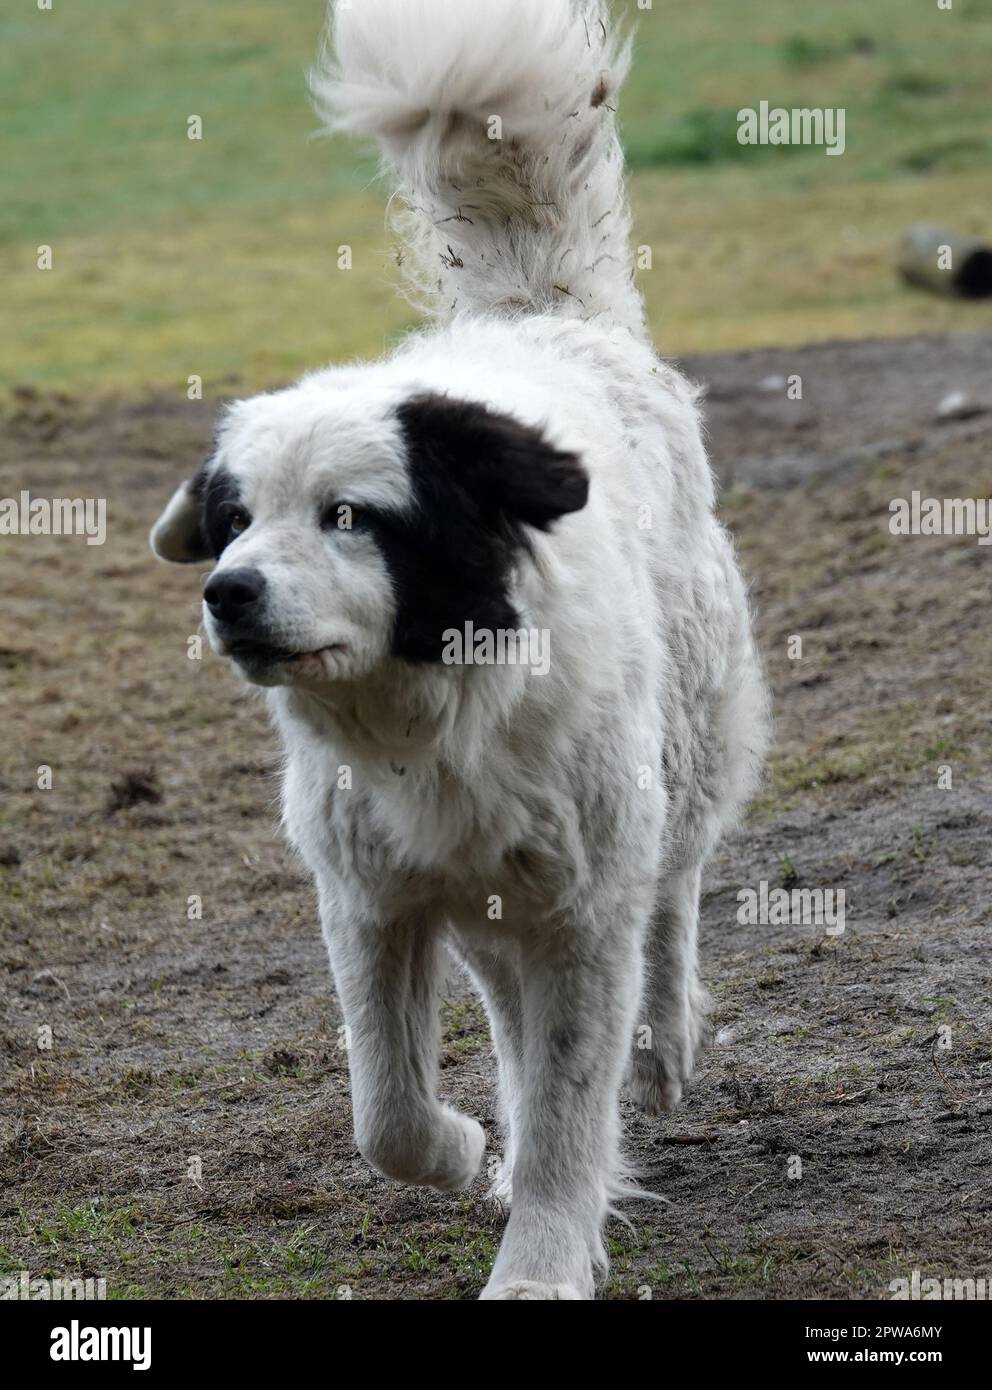 A Mastín del Pirineo or Pyrenean Mastiff runs in the direction of the photographer. He is kept to watch over a sheep herd. Stock Photo